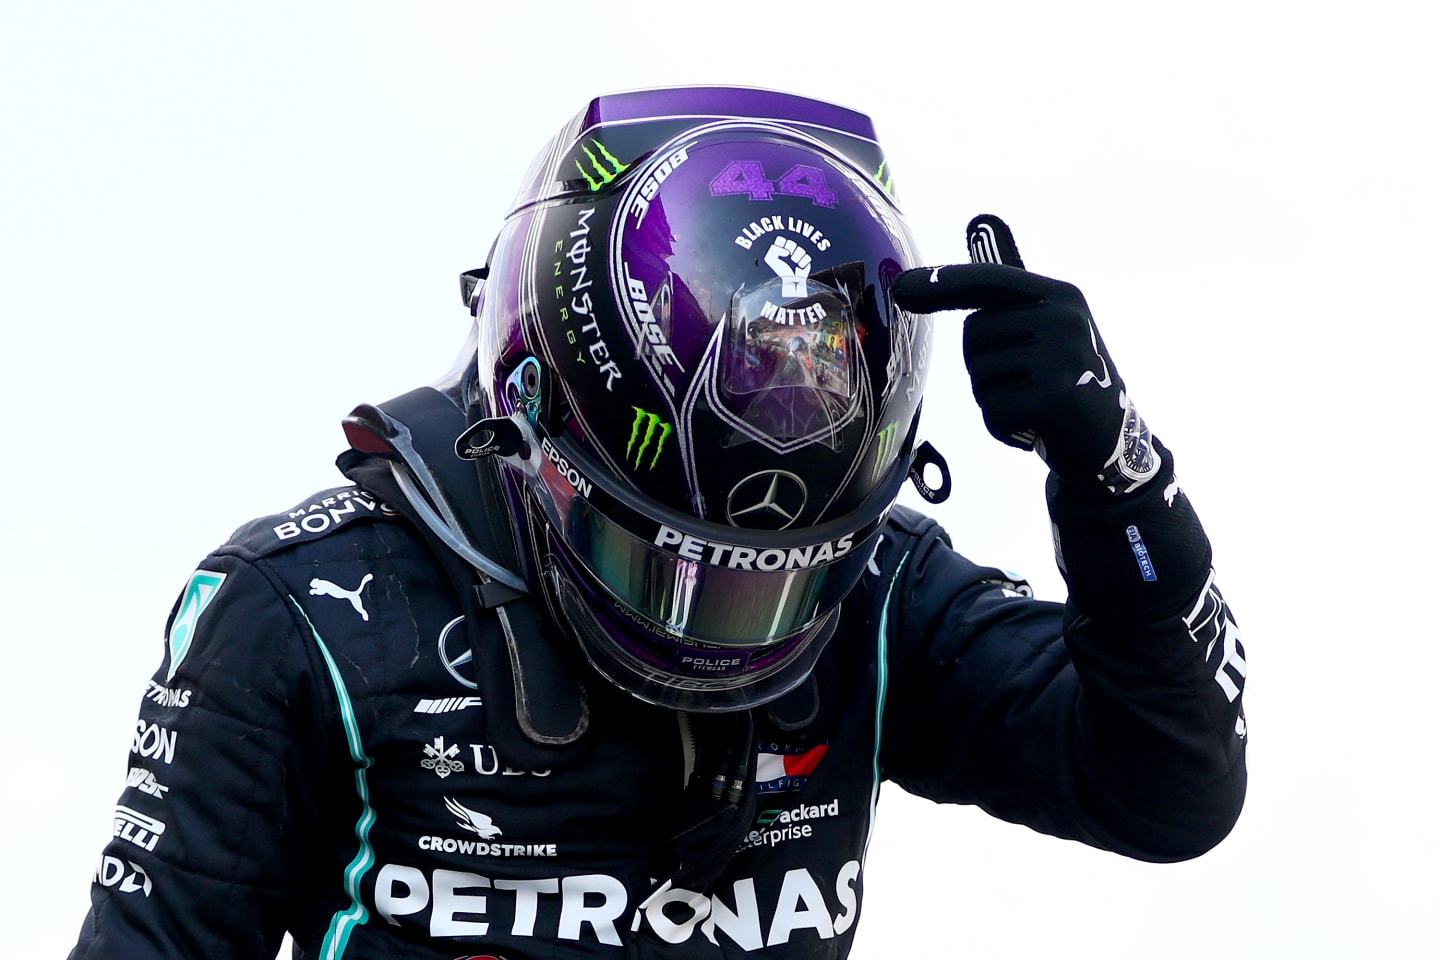 BARCELONA, SPAIN - AUGUST 16: Race winner Lewis Hamilton of Great Britain and Mercedes GP points to the 'Black Lives Matter' symbol on his helmet as he celebrates in parc ferme during the F1 Grand Prix of Spain at Circuit de Barcelona-Catalunya on August 16, 2020 in Barcelona, Spain. (Photo by Dan Istitene - Formula 1/Formula 1 via Getty Images)